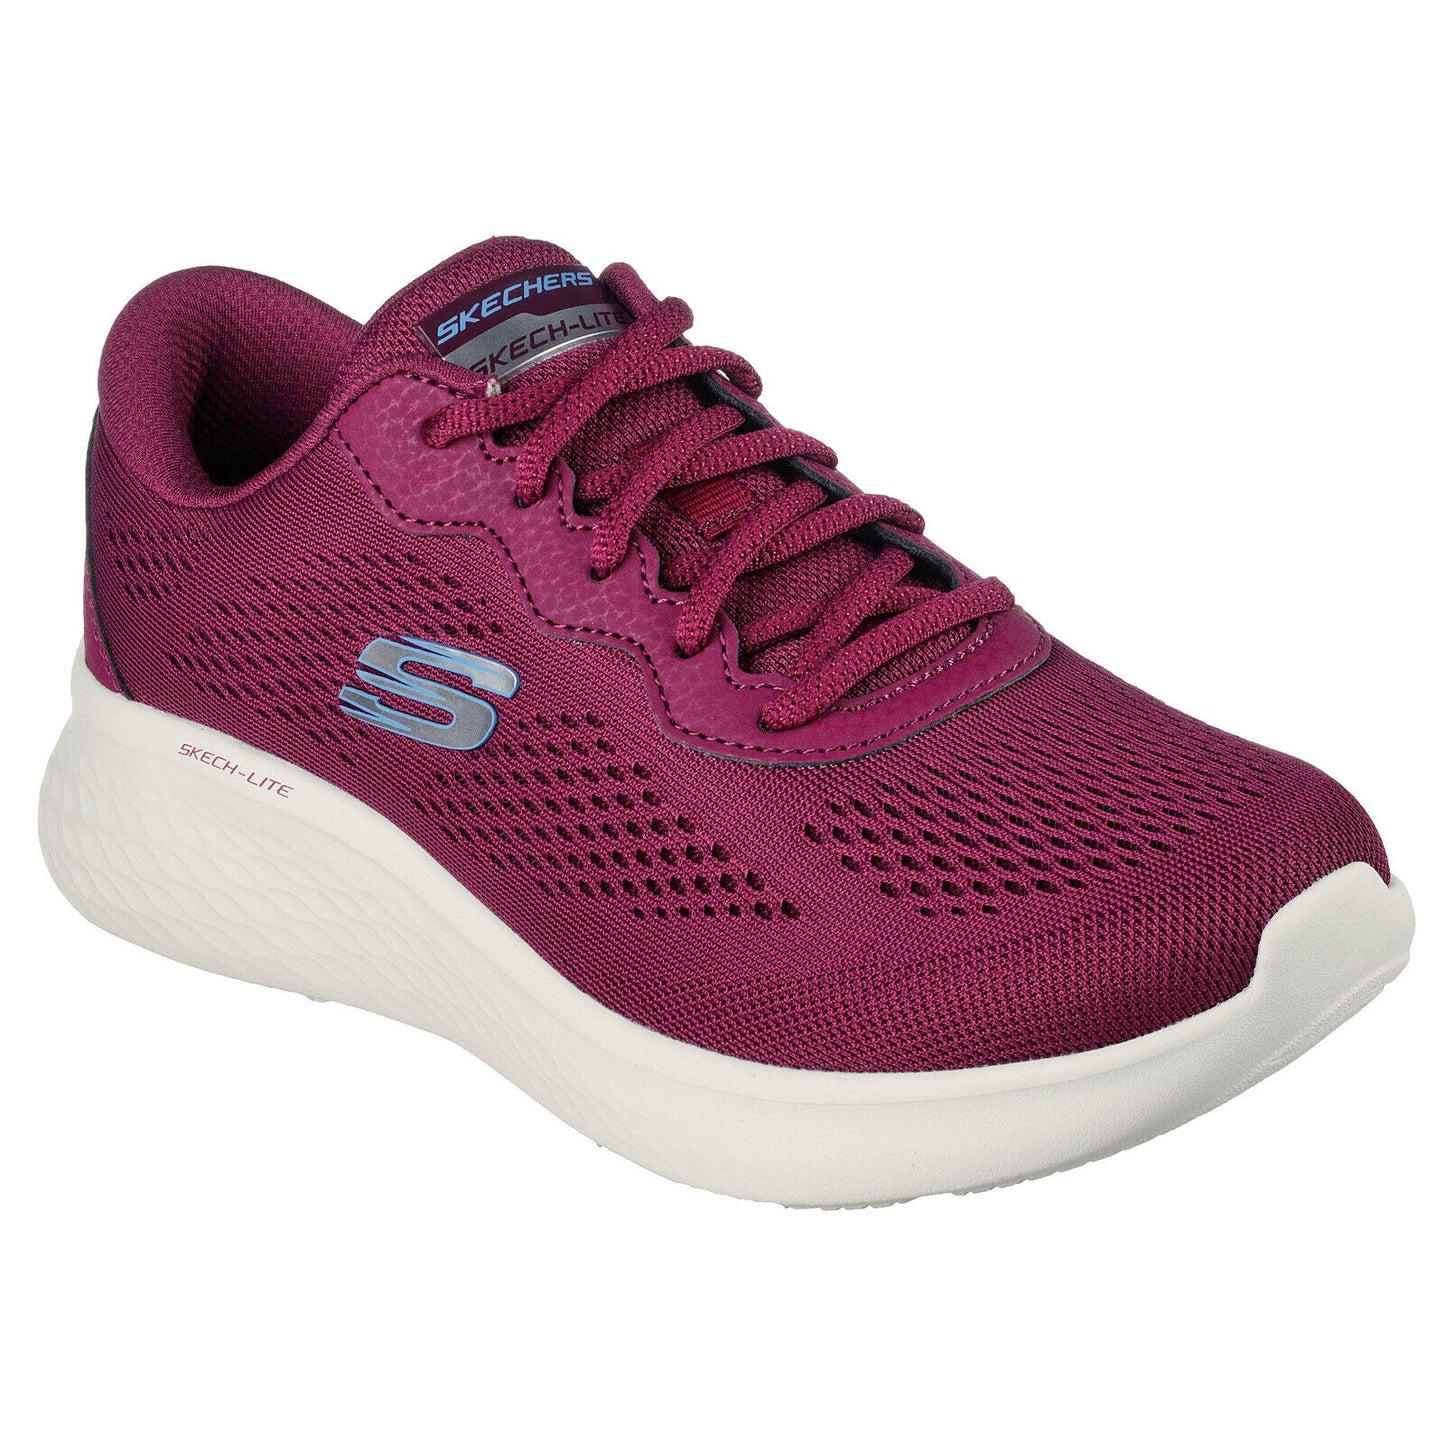 Skechers Skechlite Pro Perfect Time Plum Vegan Trainers Shoes